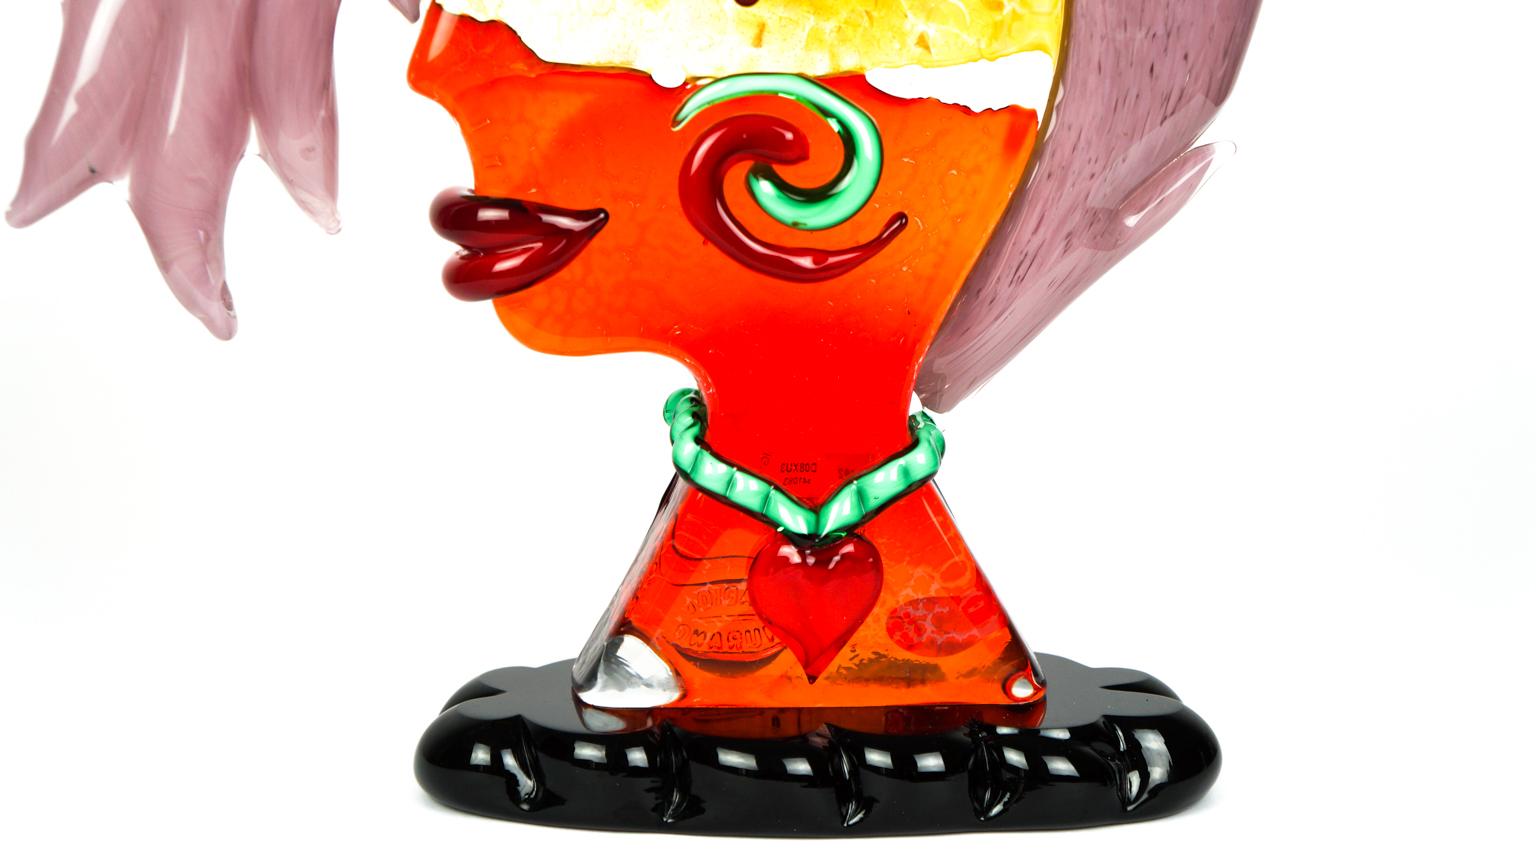 Abstract Sculpture Tribute to Pablo Picasso Head Lulù Murano Glass by Badioli For Sale 1